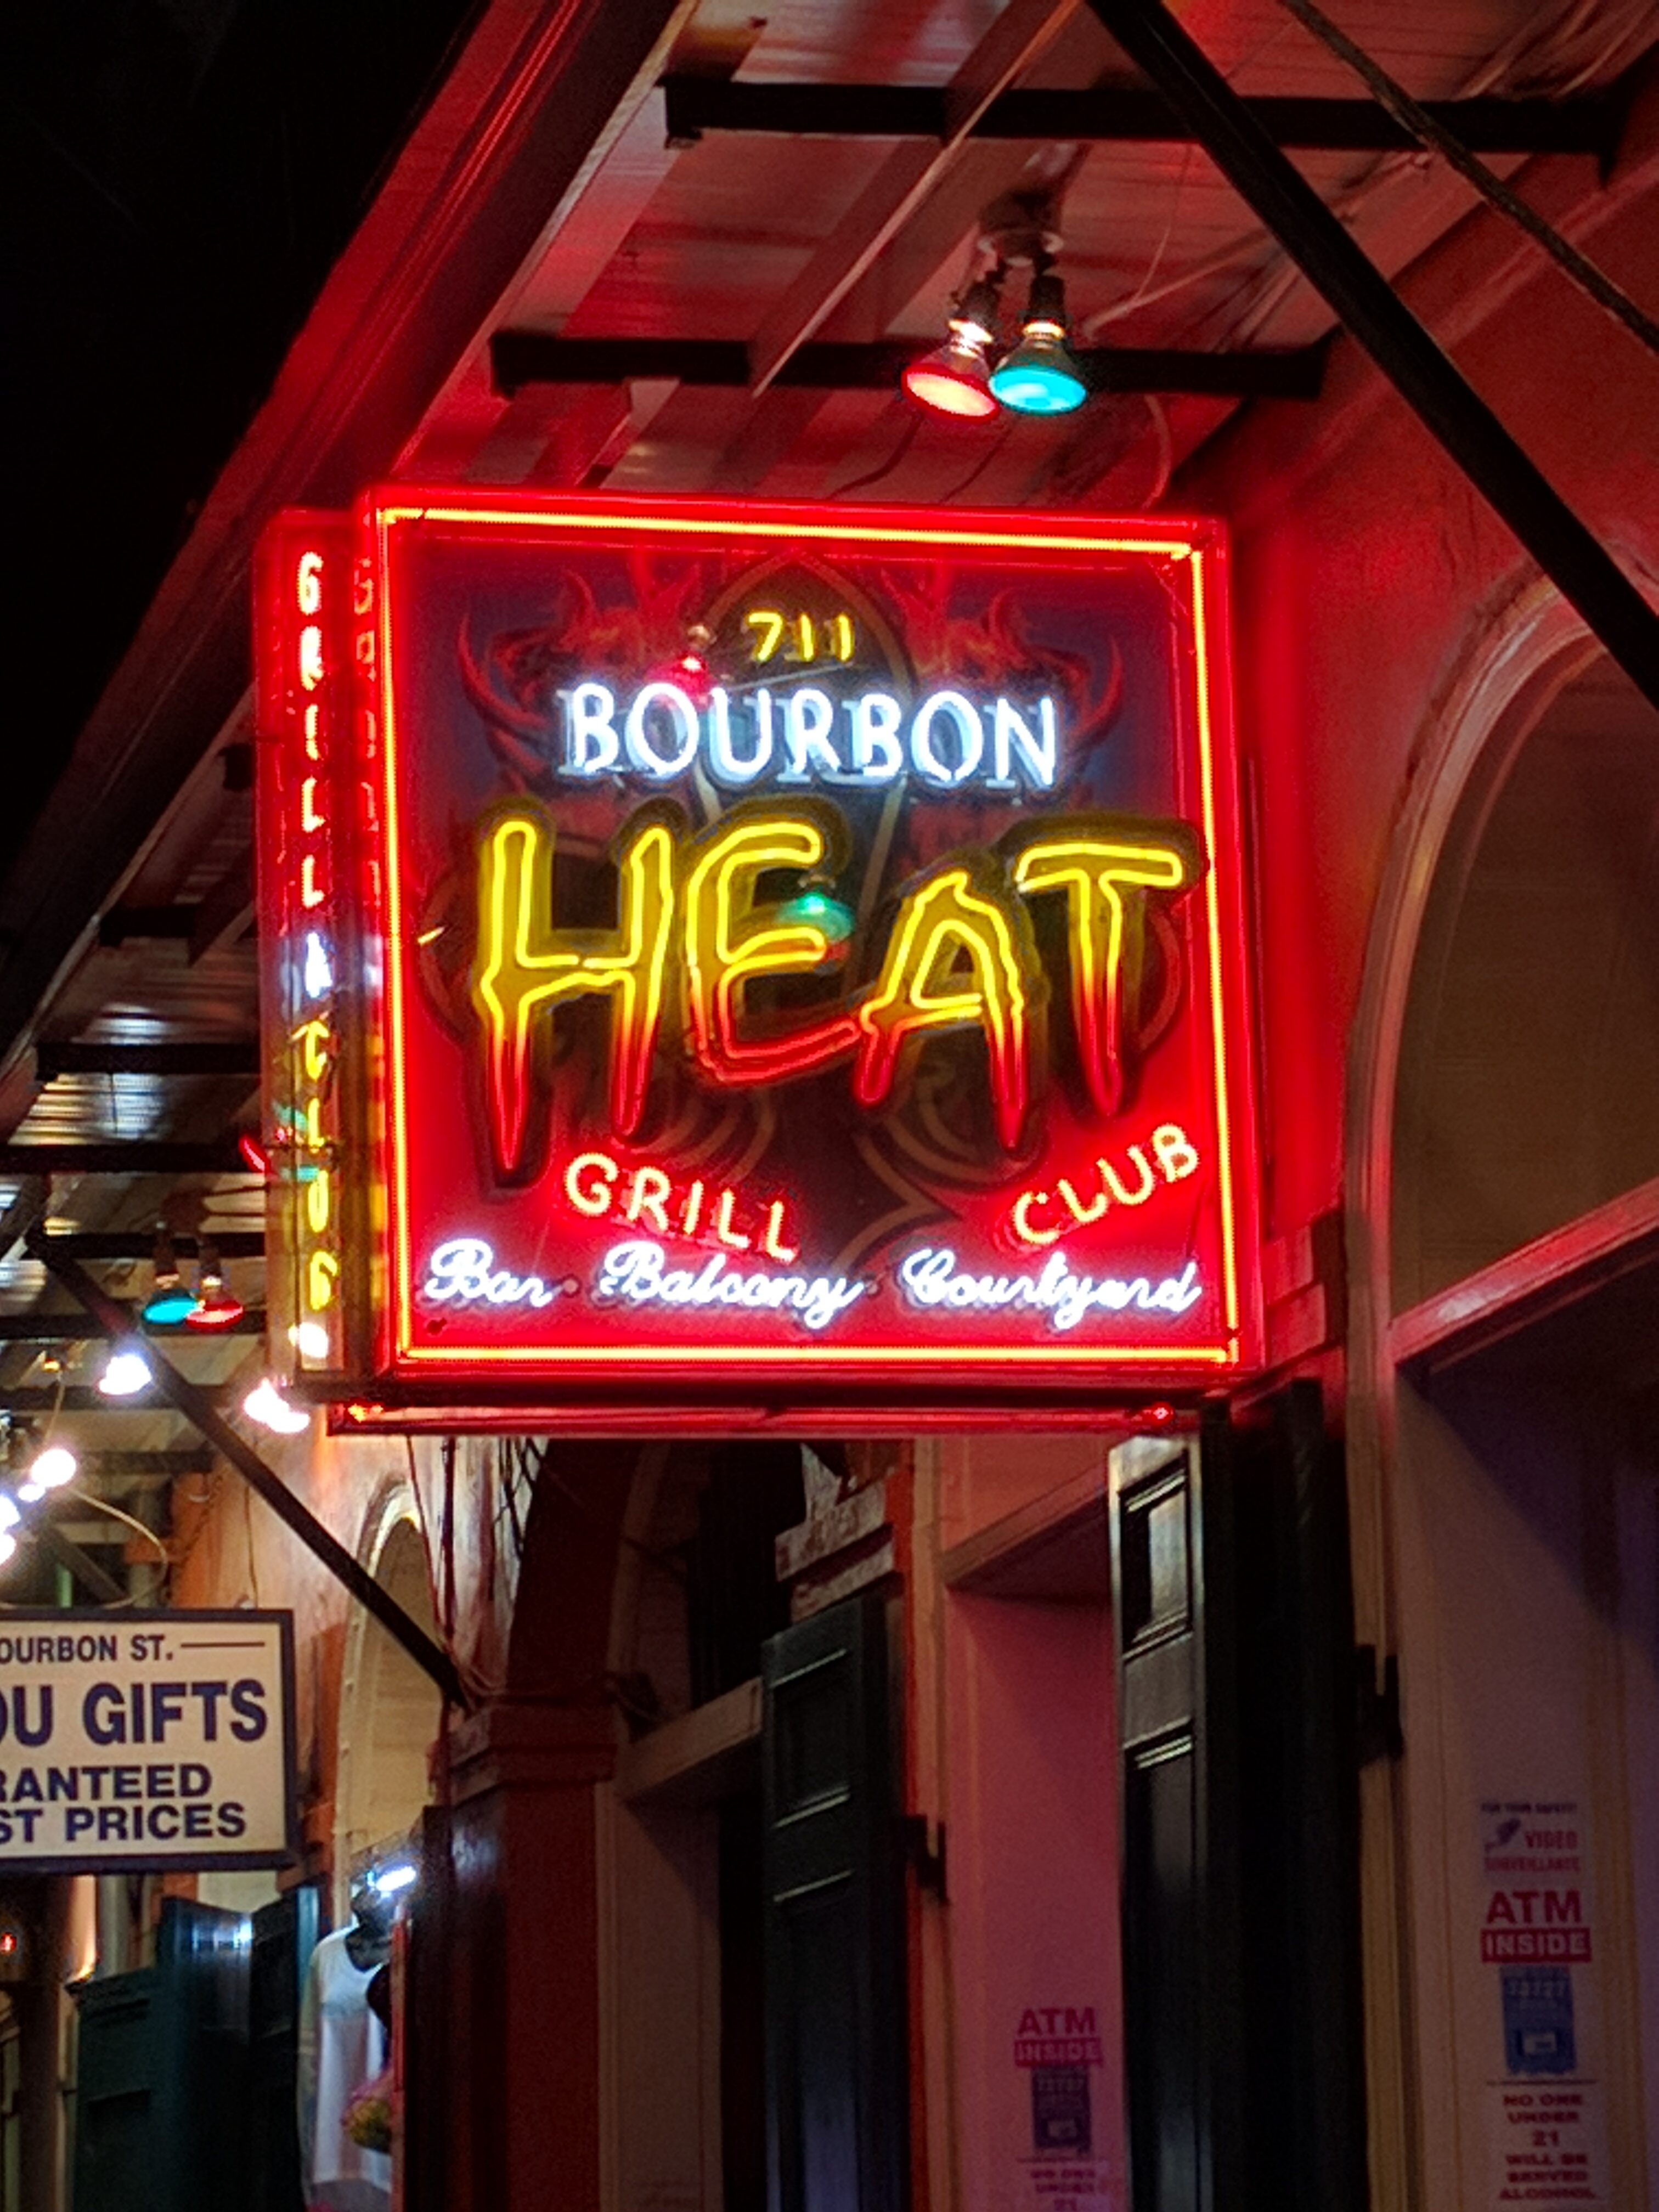 The heat was on along bourbon street, in more than one way